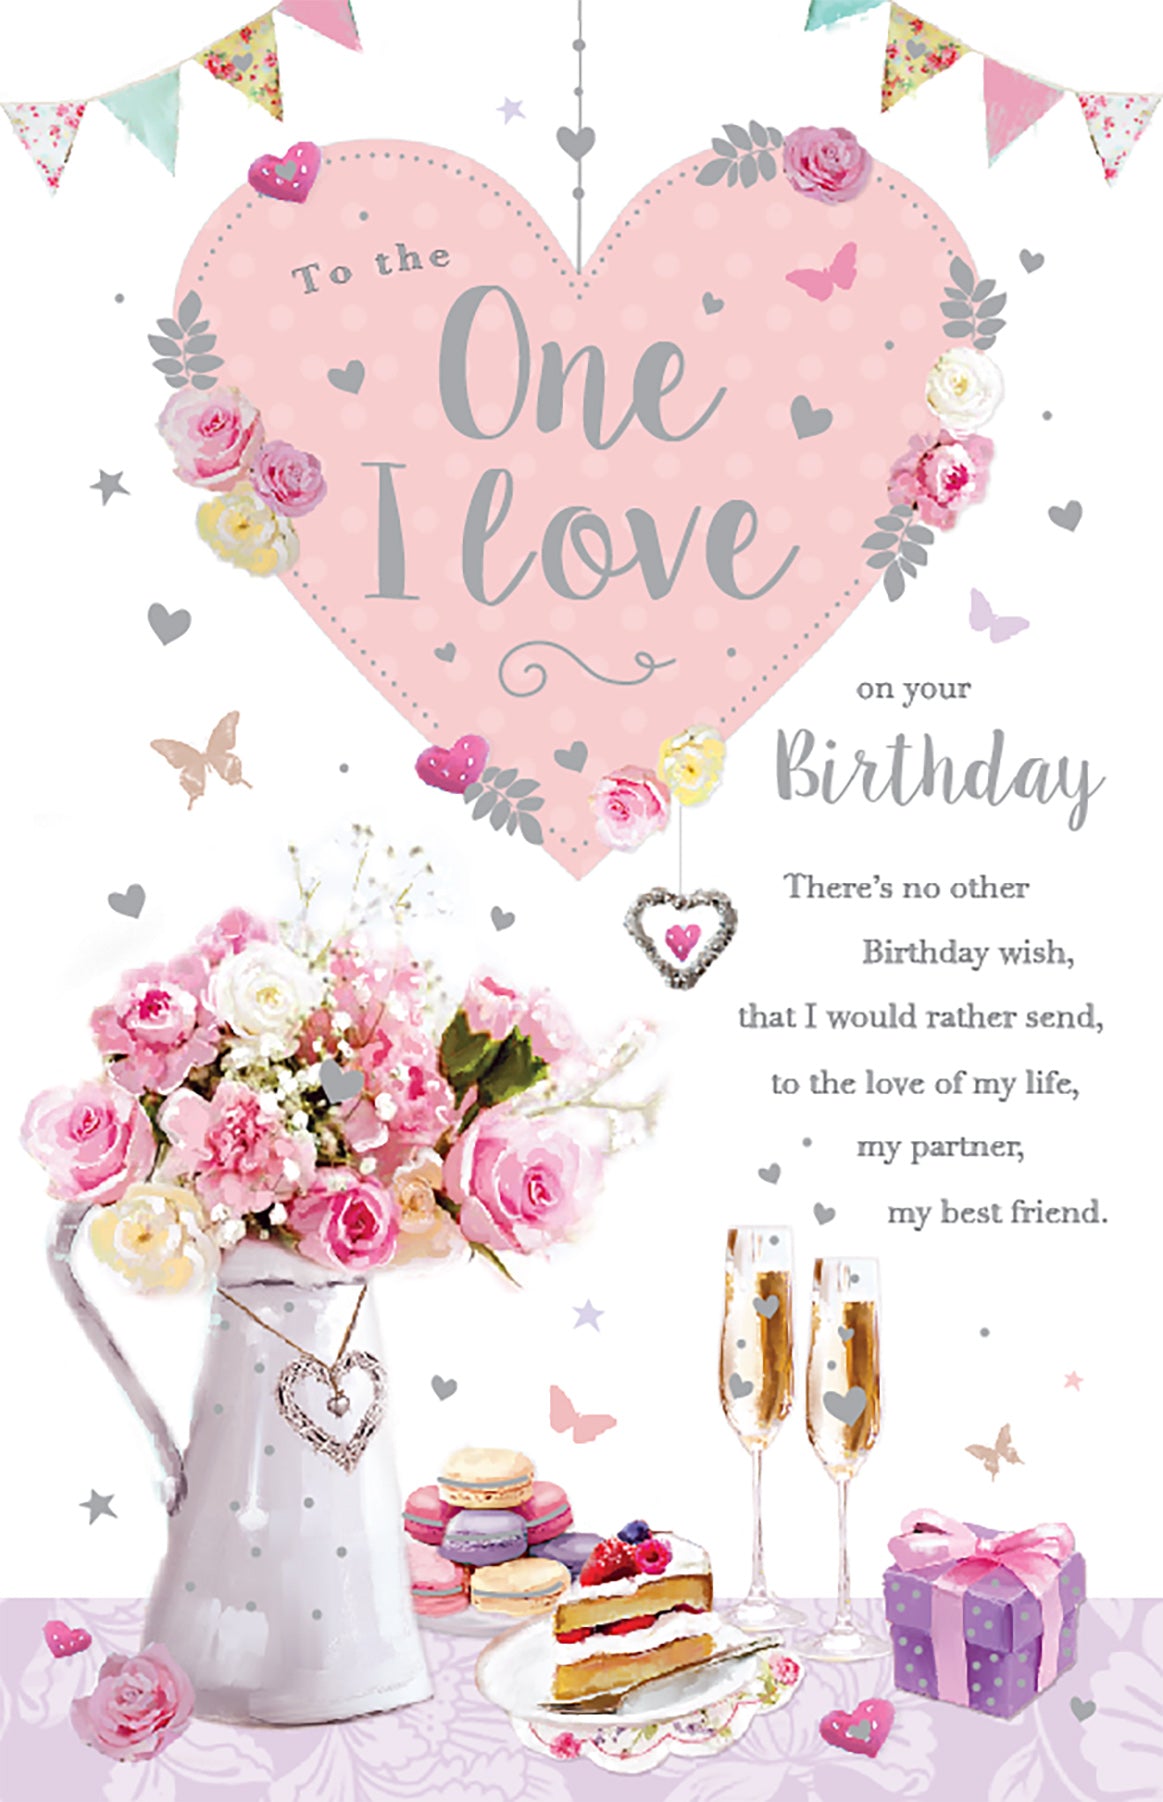 One I love birthday card - flowers and cake